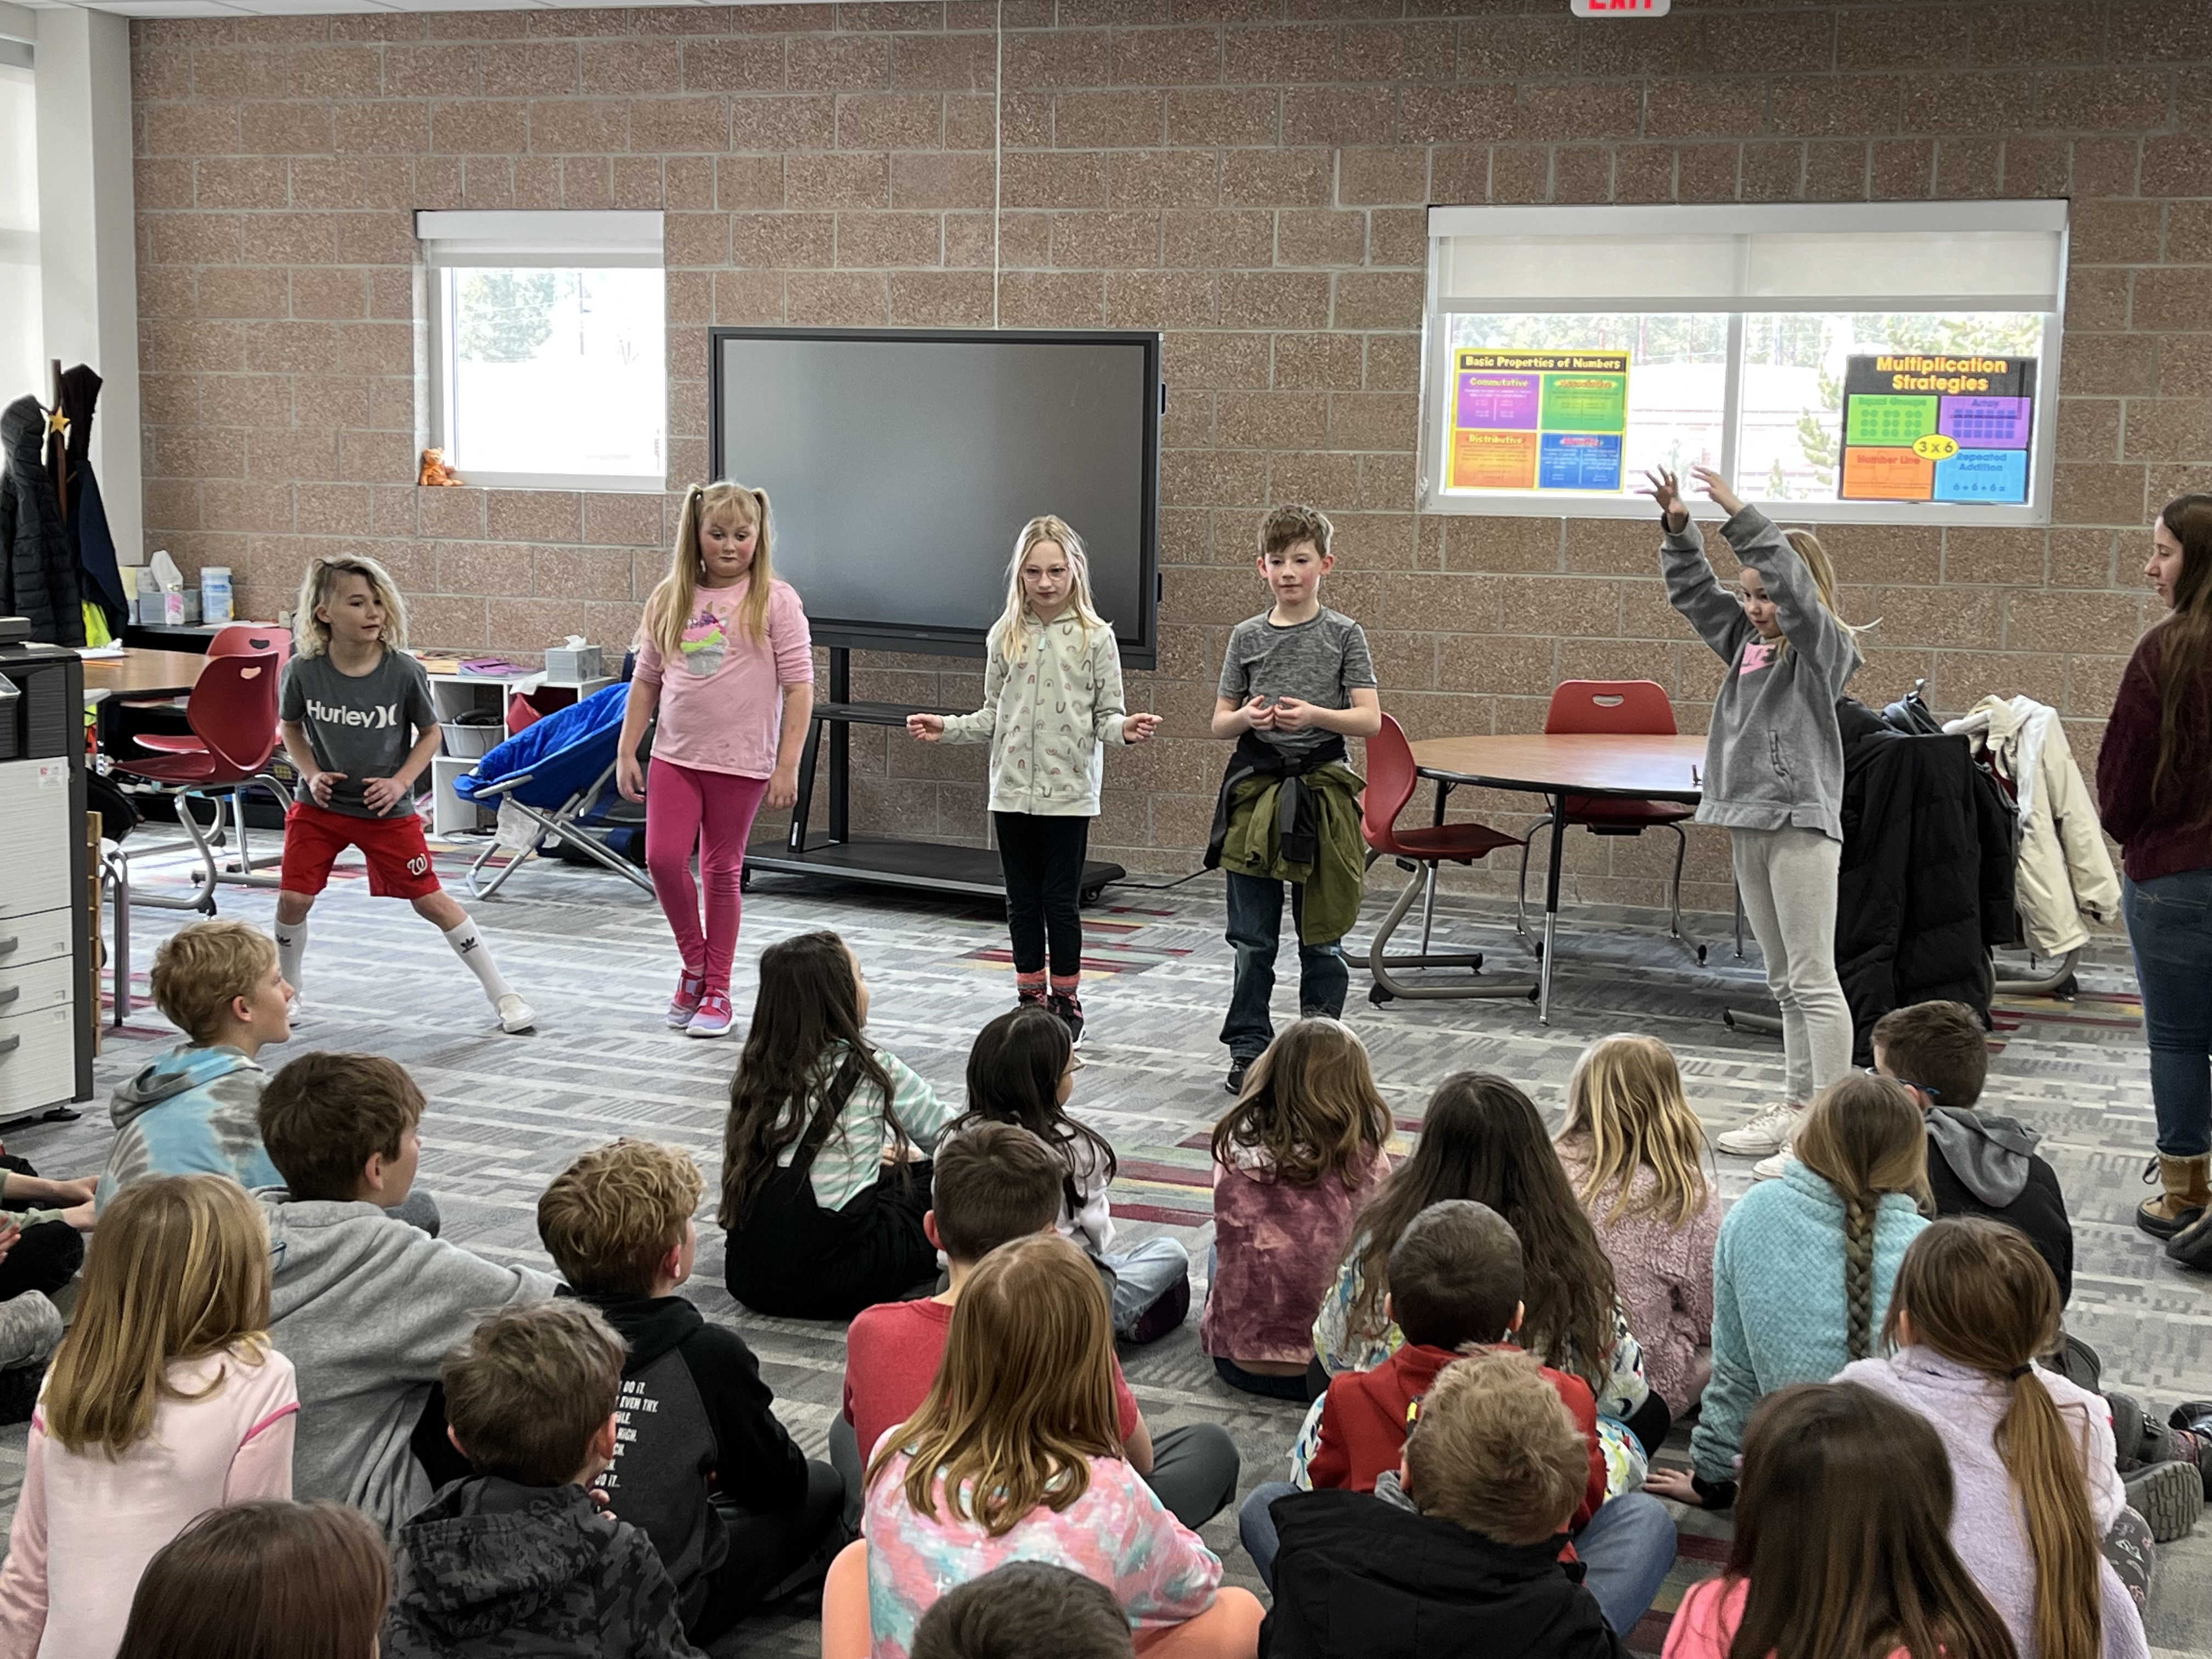 Students performing the show they learned from the presentation in front of an audience